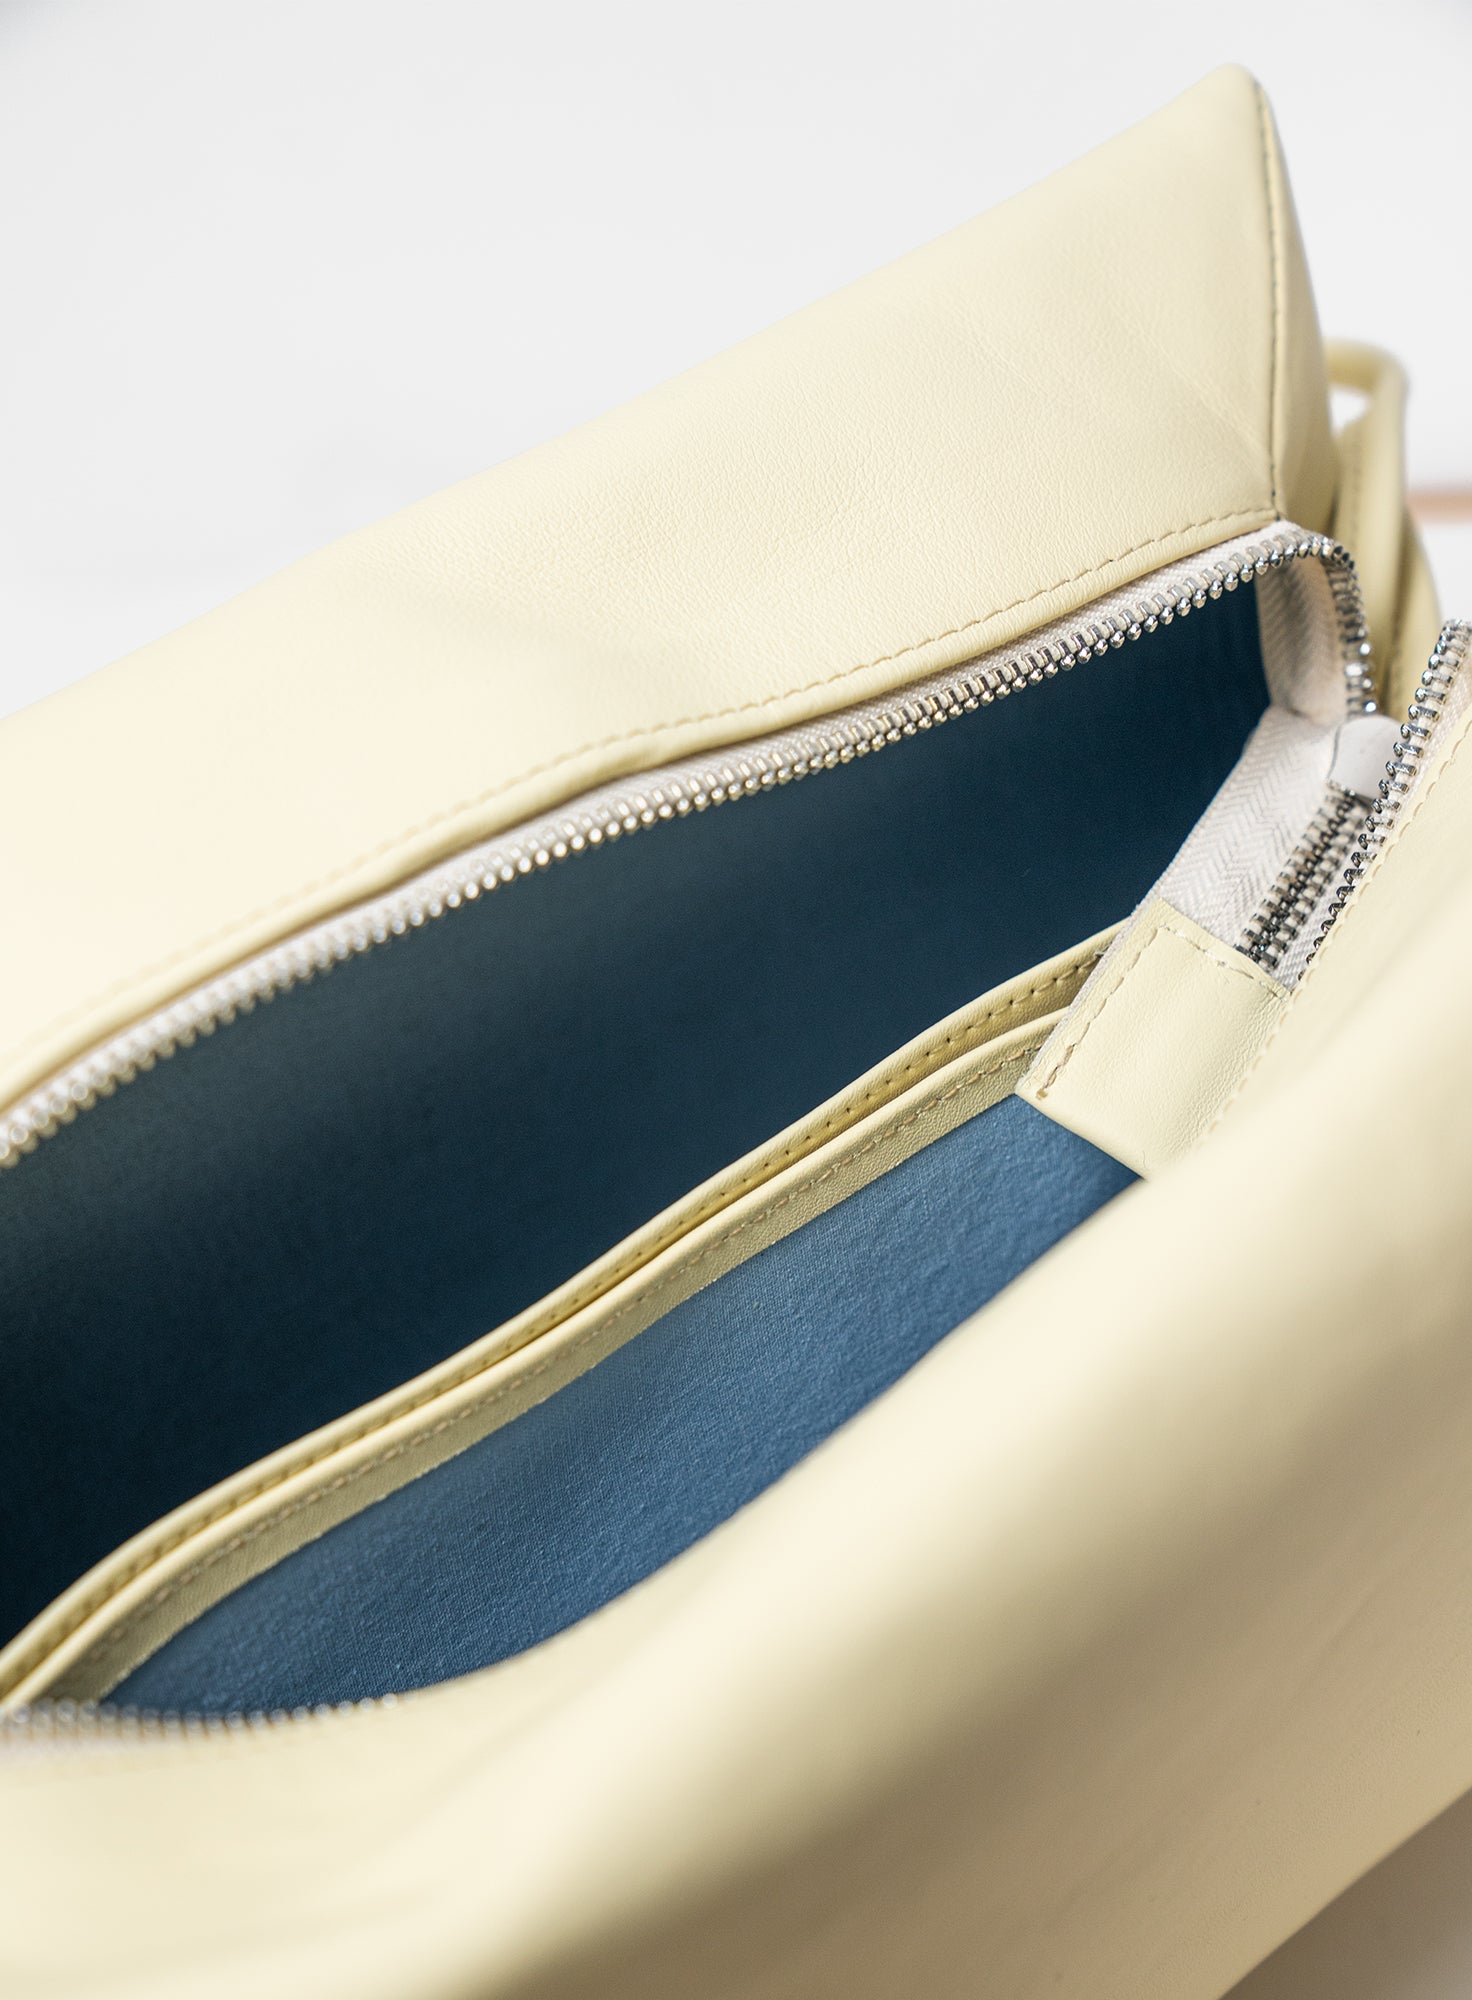 CROSSBODY_BAG_CHARLY_BUTTER_Designed_in_Berlin_Made_to_last_Handmade_in_Poland.